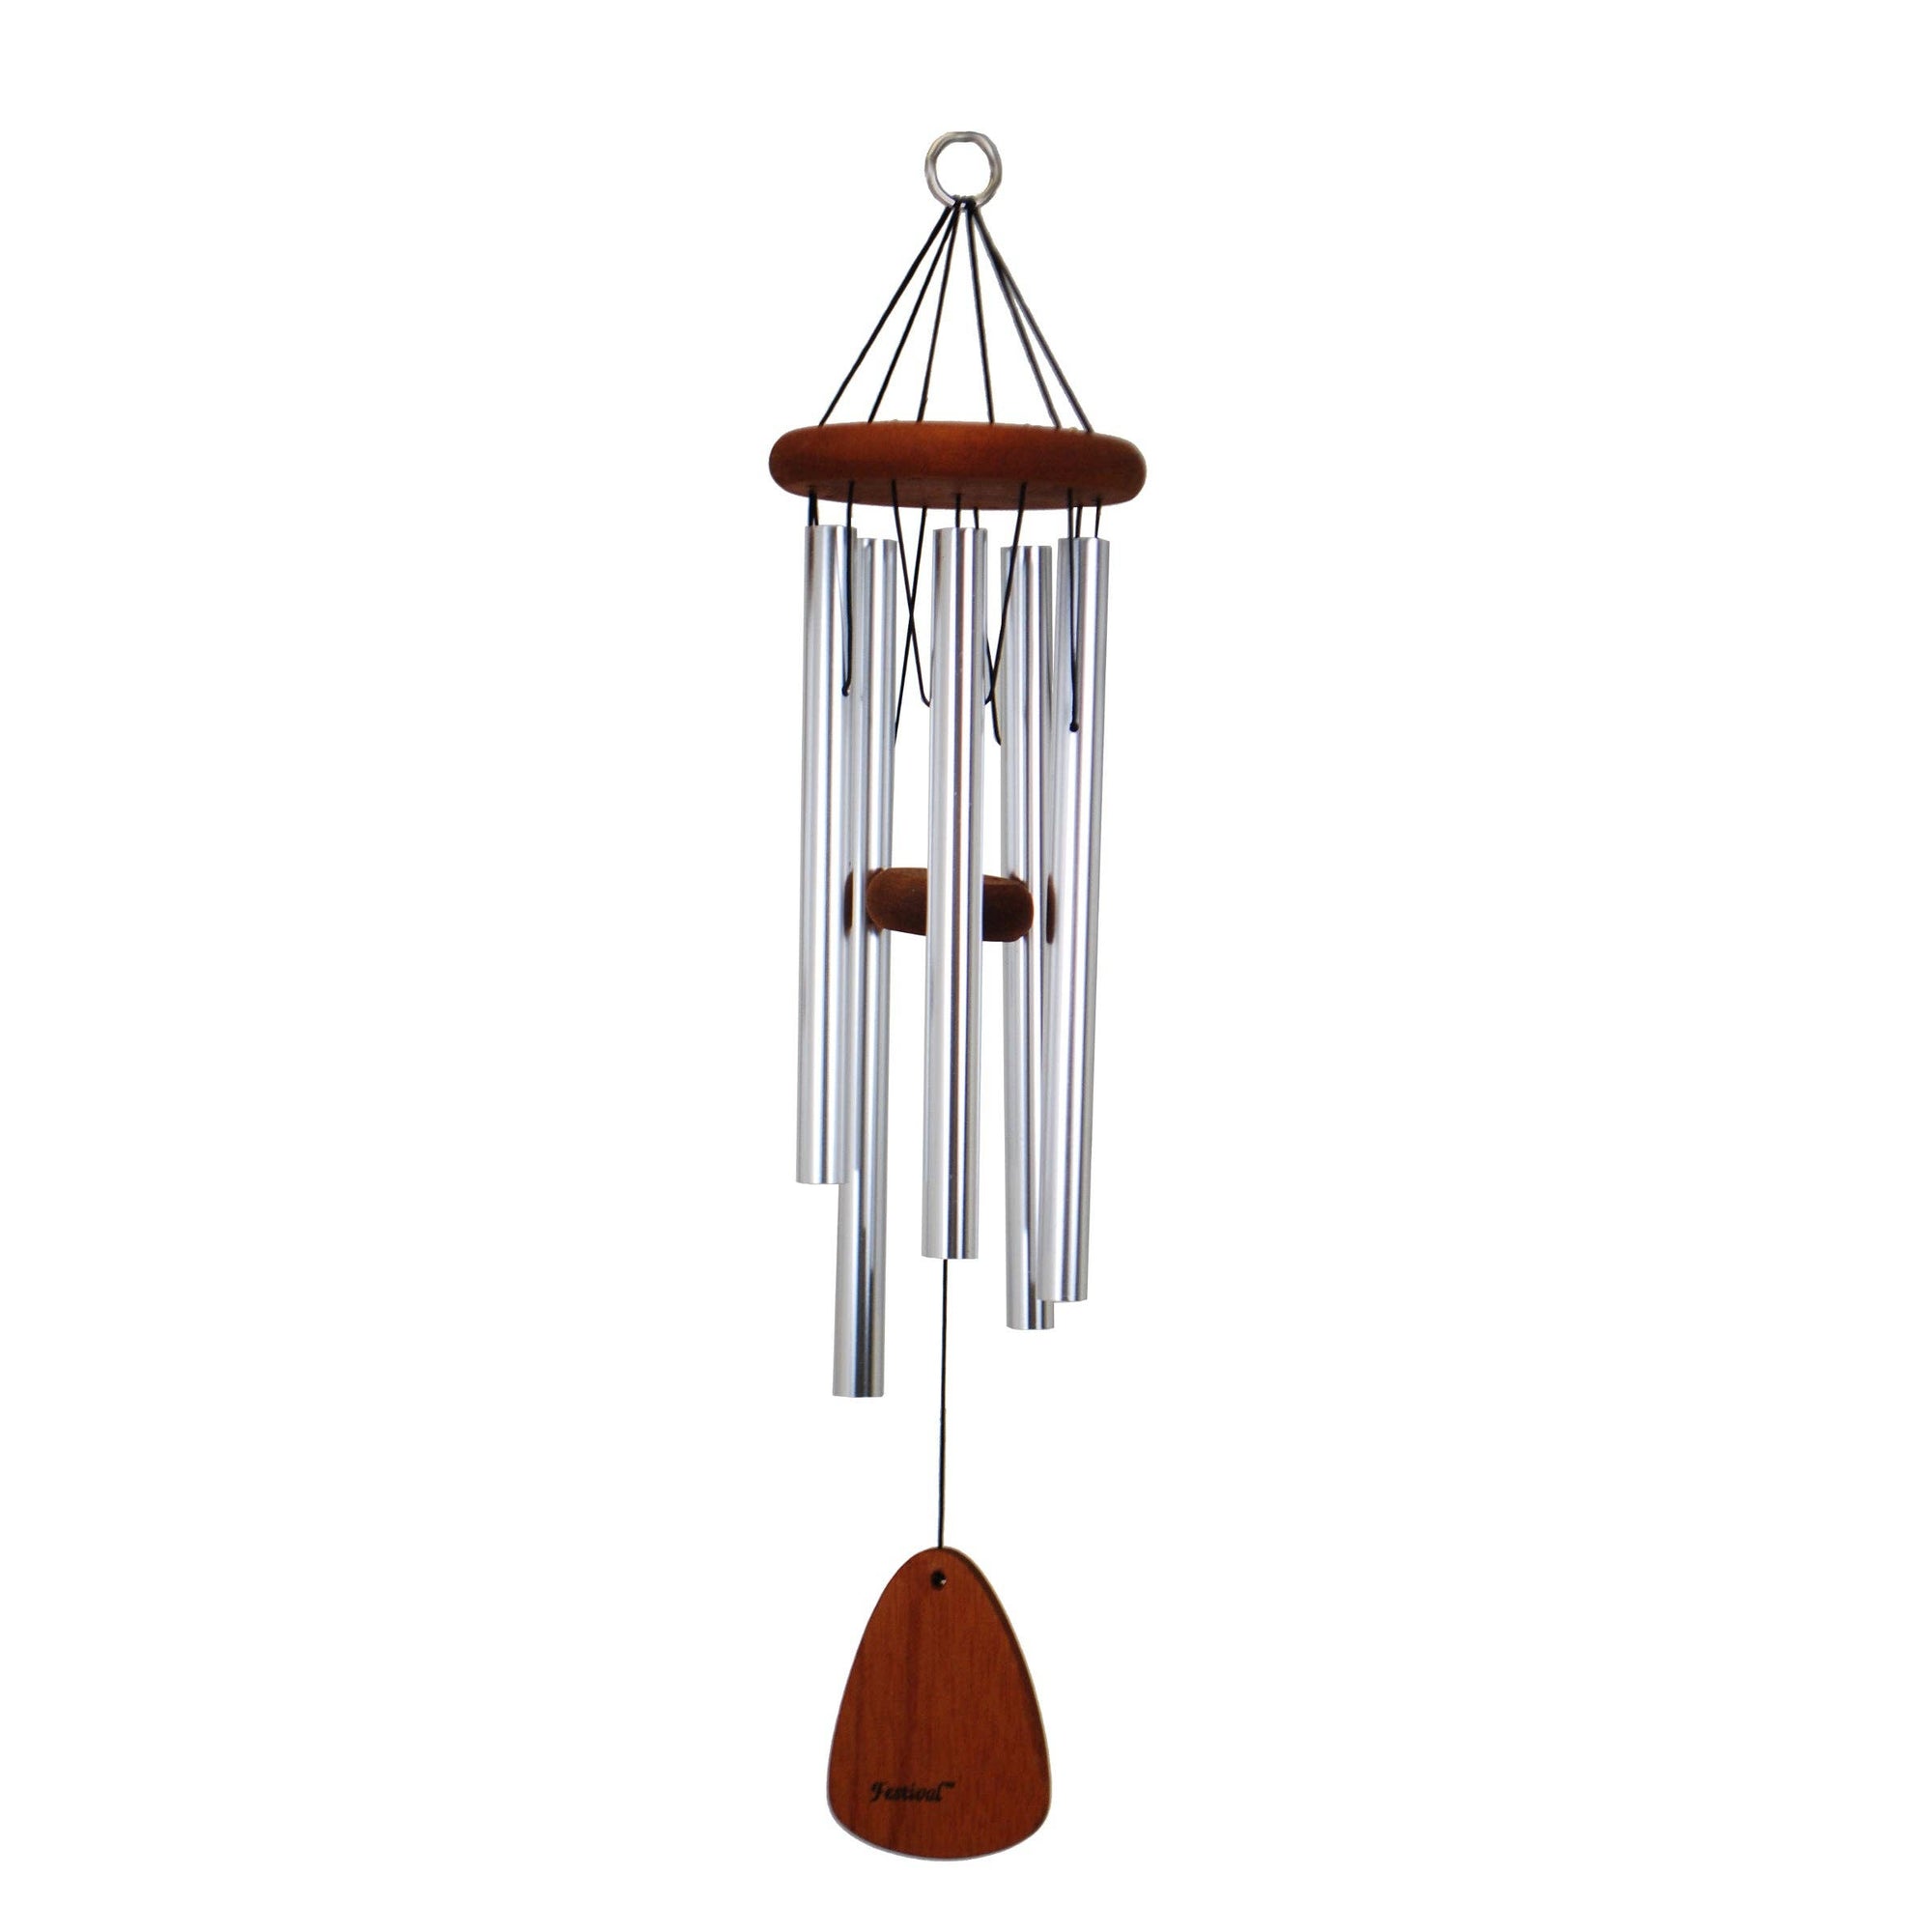 A Festival® 30-inch Windchime made of wood hanging against a serene white background, offering comforting sounds.